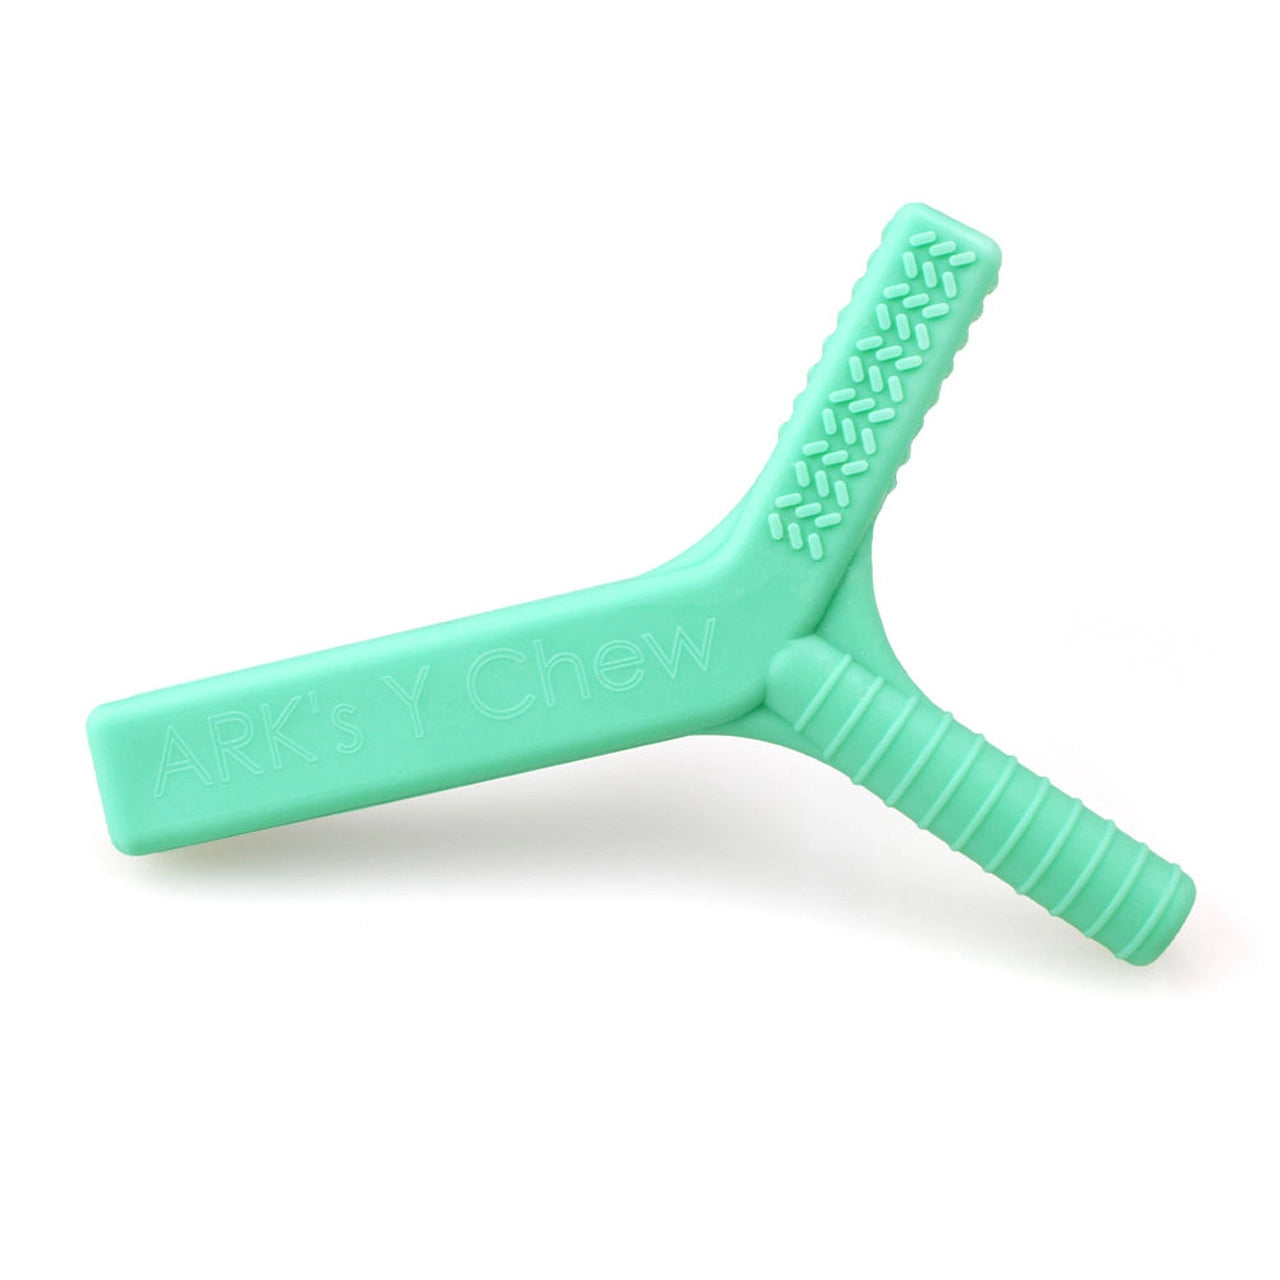 ARK'S_Y-CHEW_ORAL_MOTOR_CHEW_turquoise